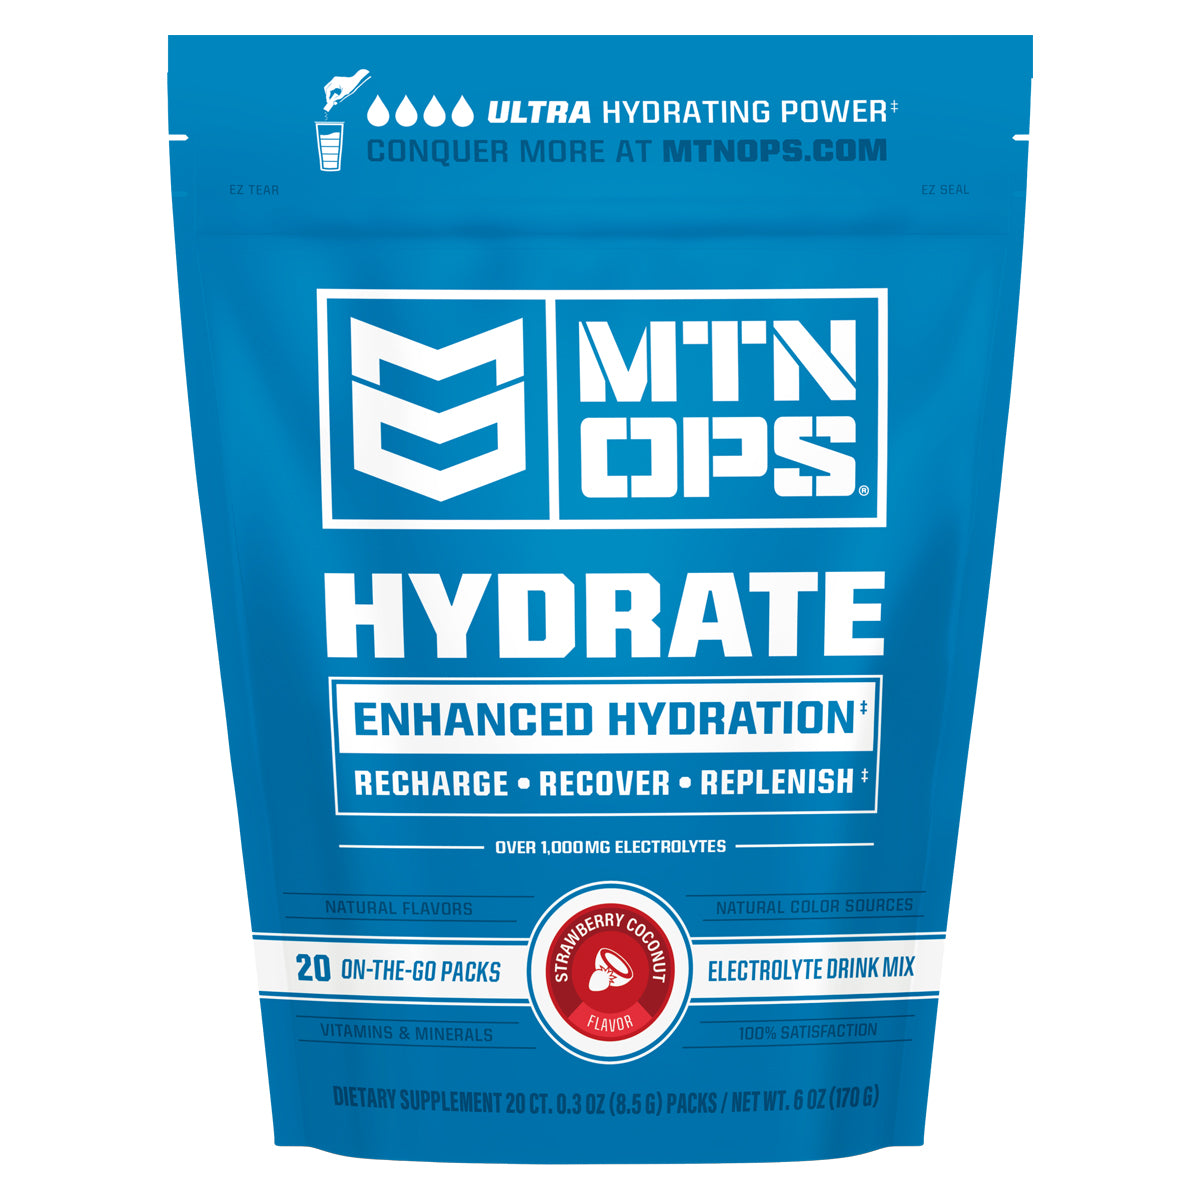 MTN OPS Hydrate in Strawberry Coconut by GOHUNT | Mtn Ops - GOHUNT Shop